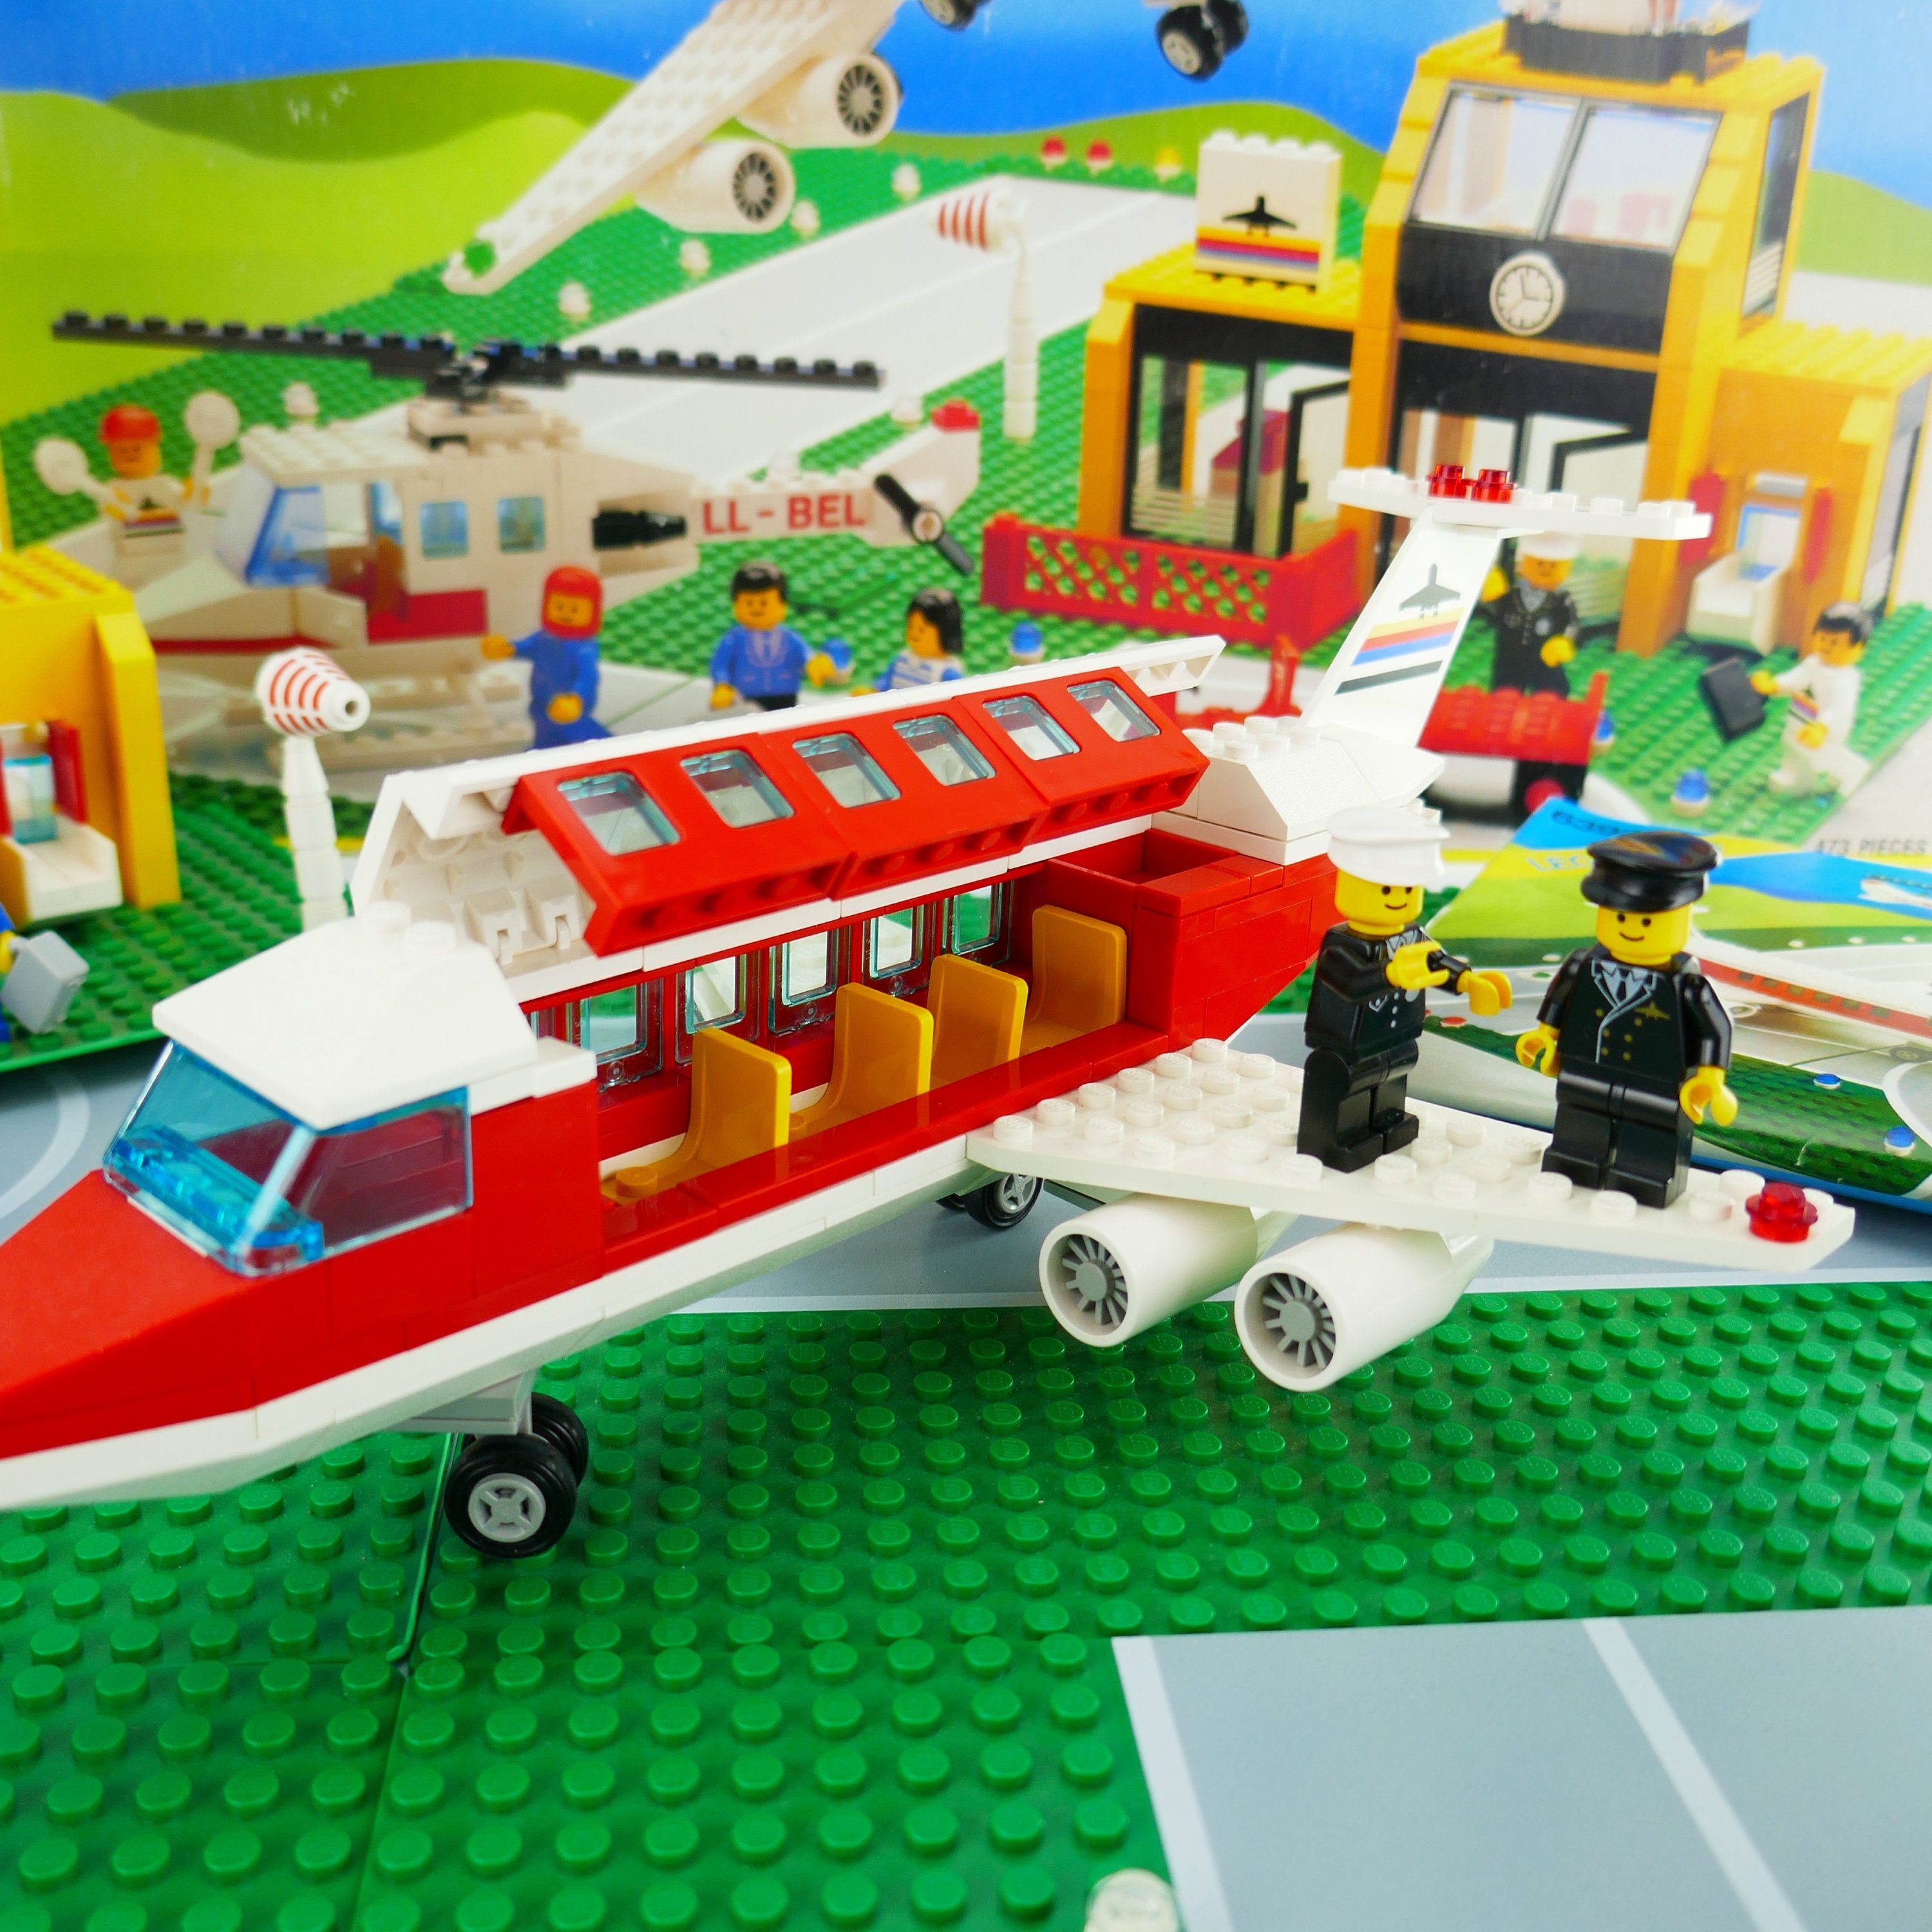 LEGO 6392 Airport in Box 99% Complete With Box & -